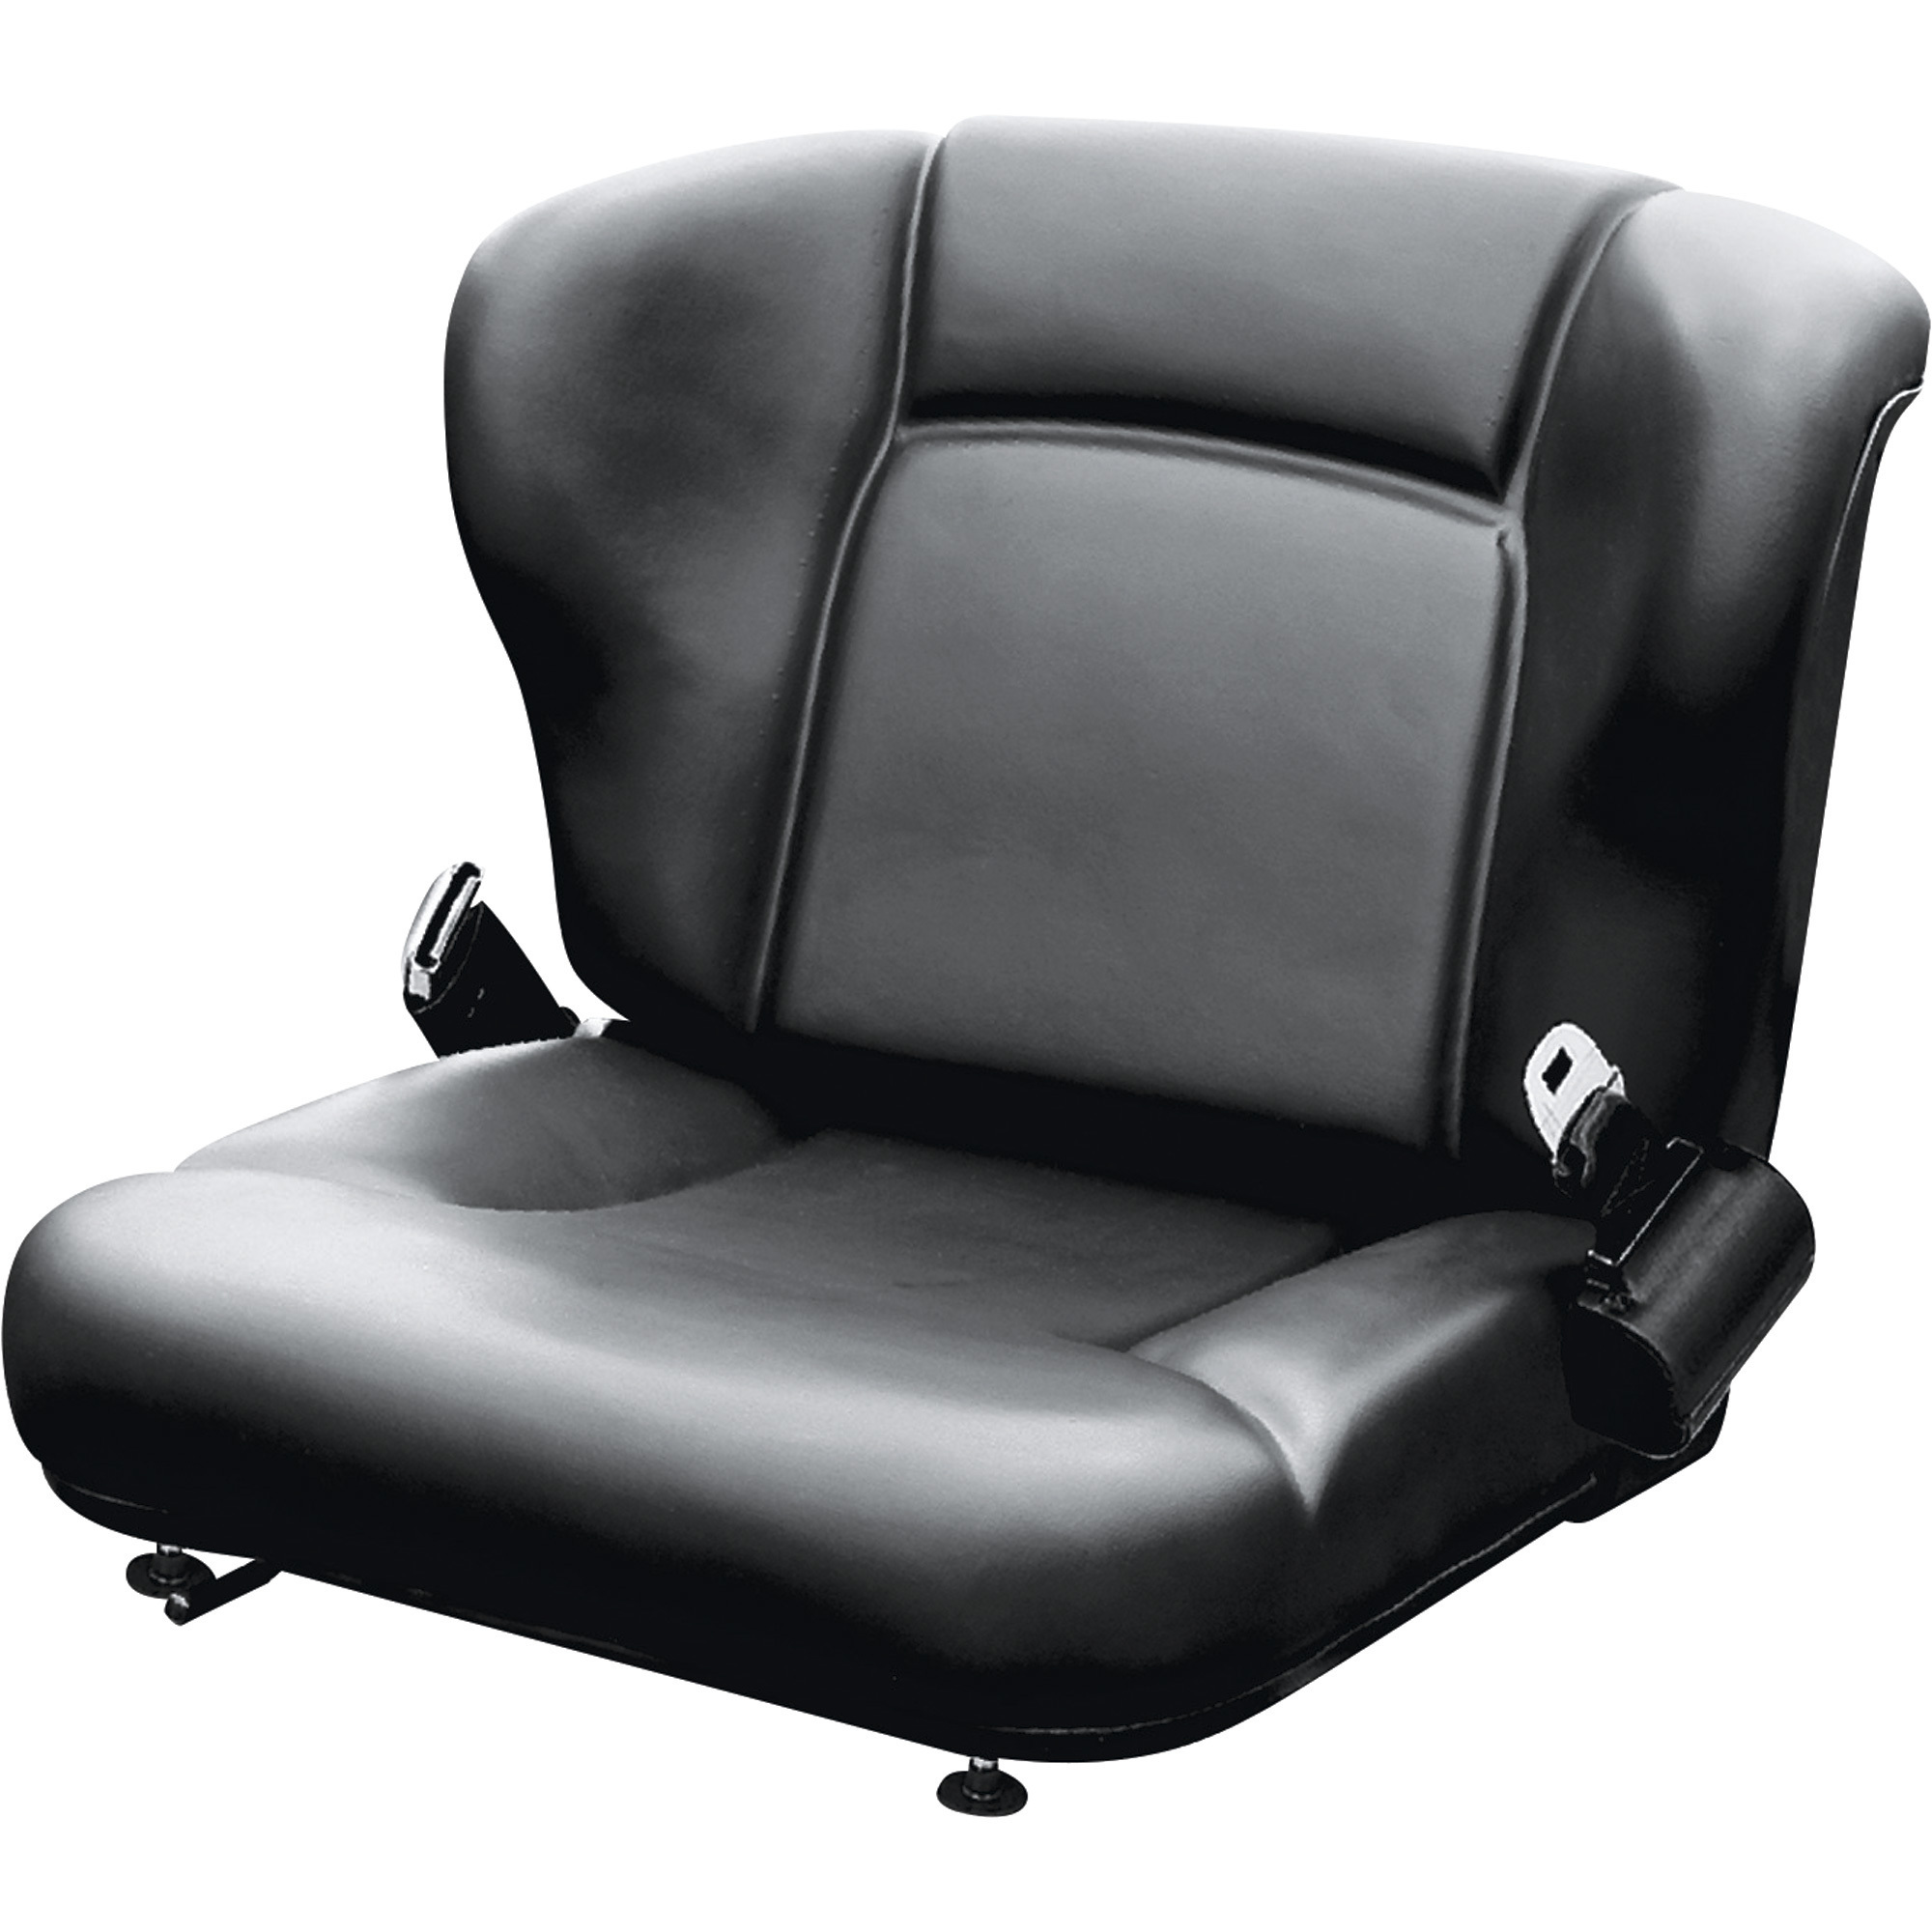 Wise Toyota-Style Universal Bucket Seat Assembly â Black, Model WM1357